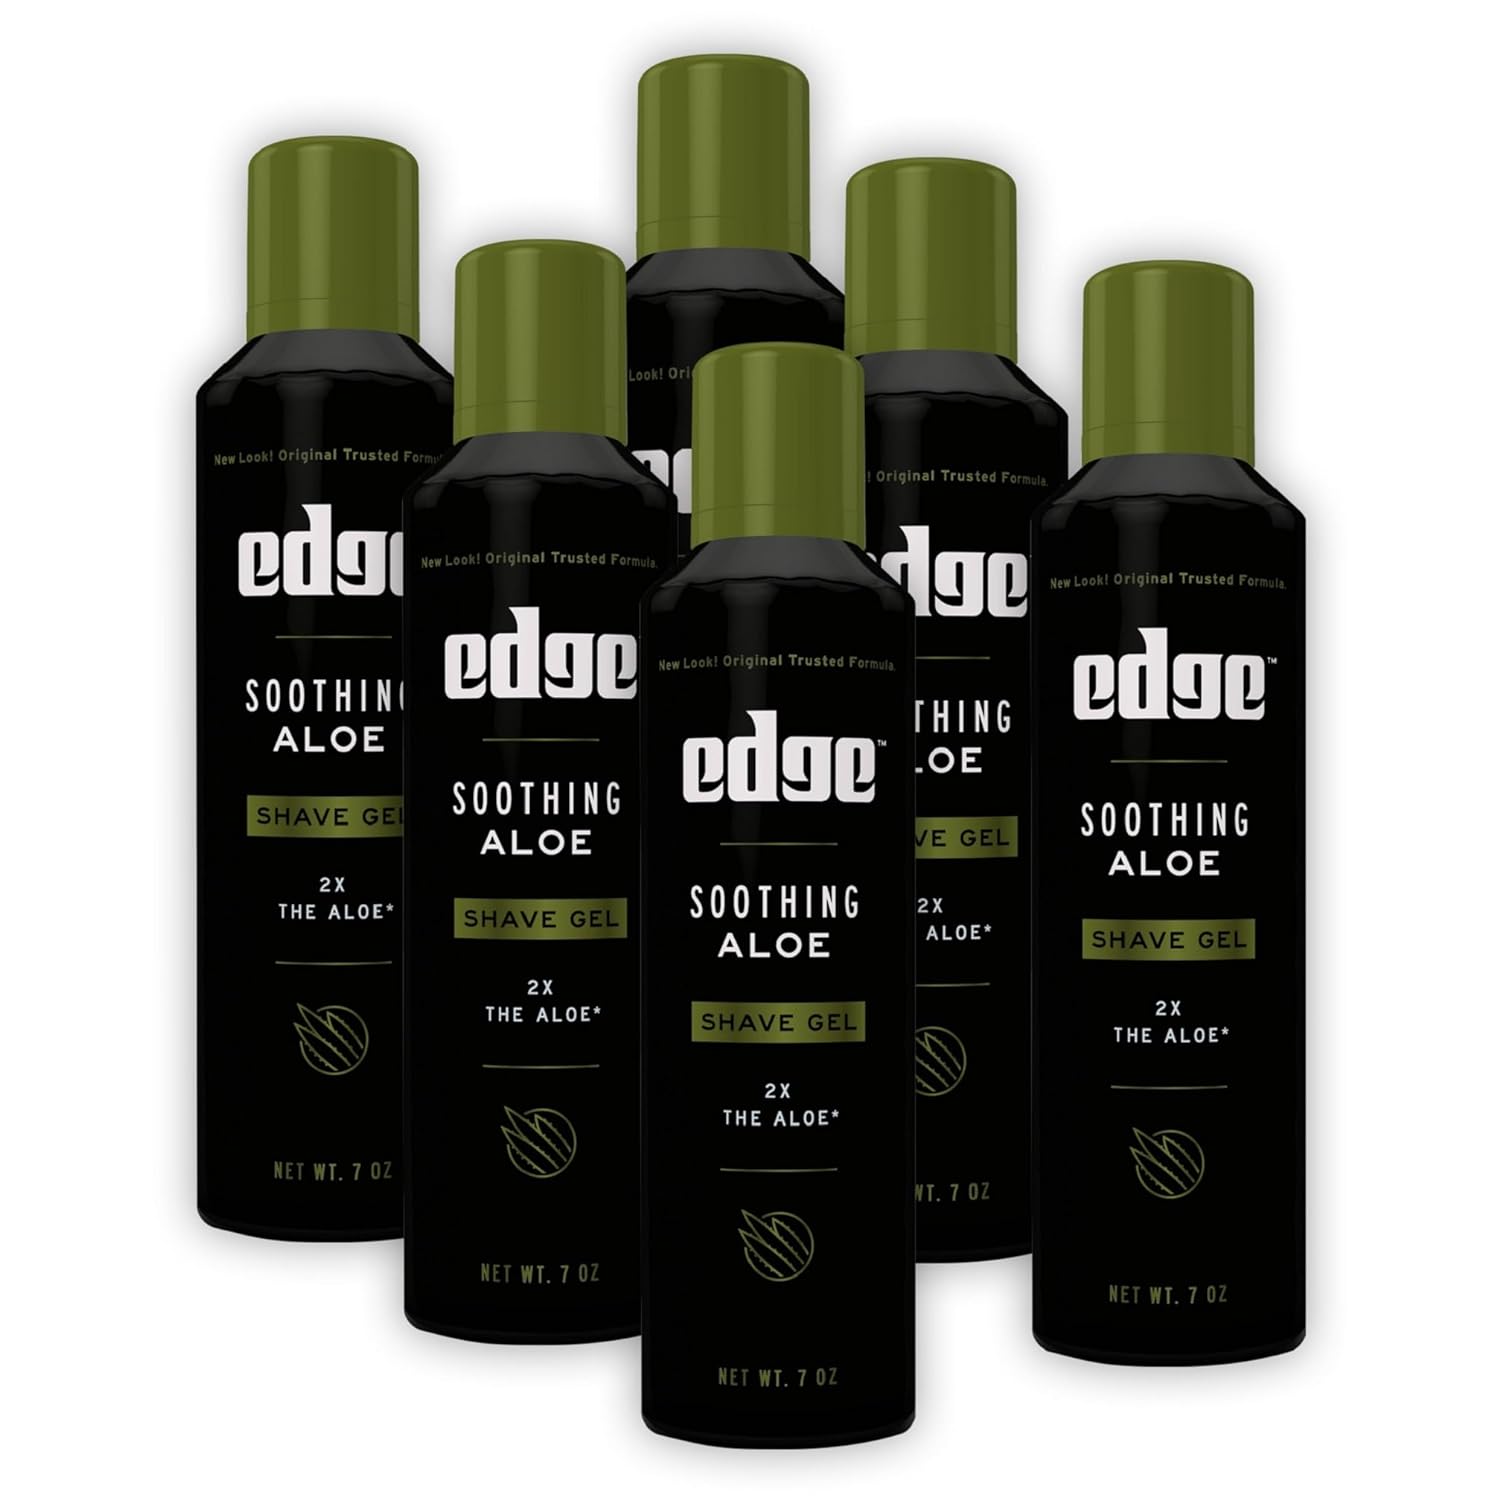 Edge Soothing Aloe Shave Gel for Men, Hydrates and Refreshes Skin, 7oz (6 Pack)